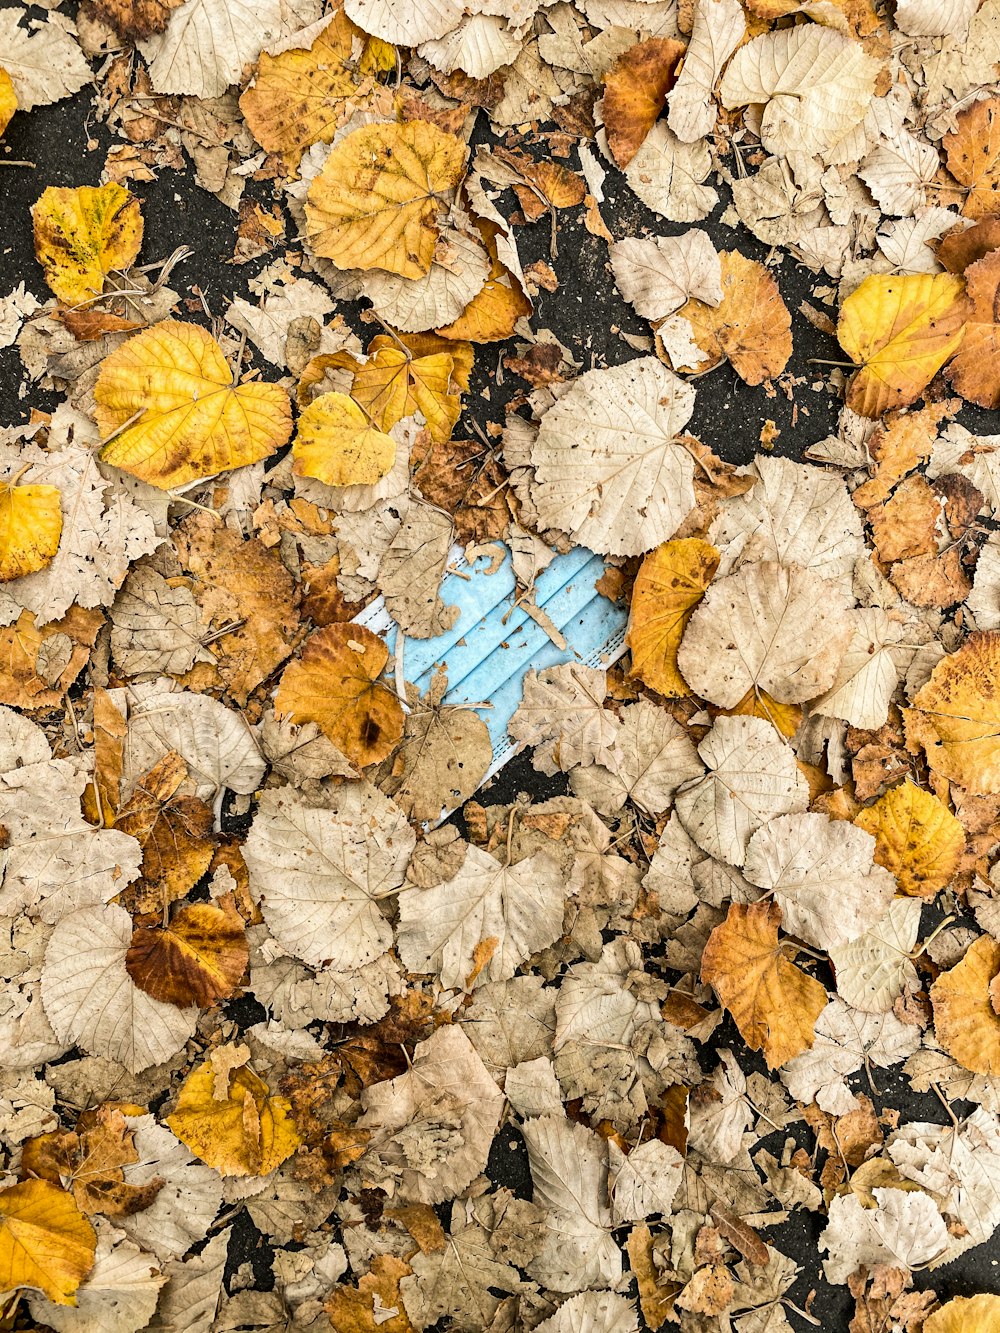 brown leaves on blue plastic crate